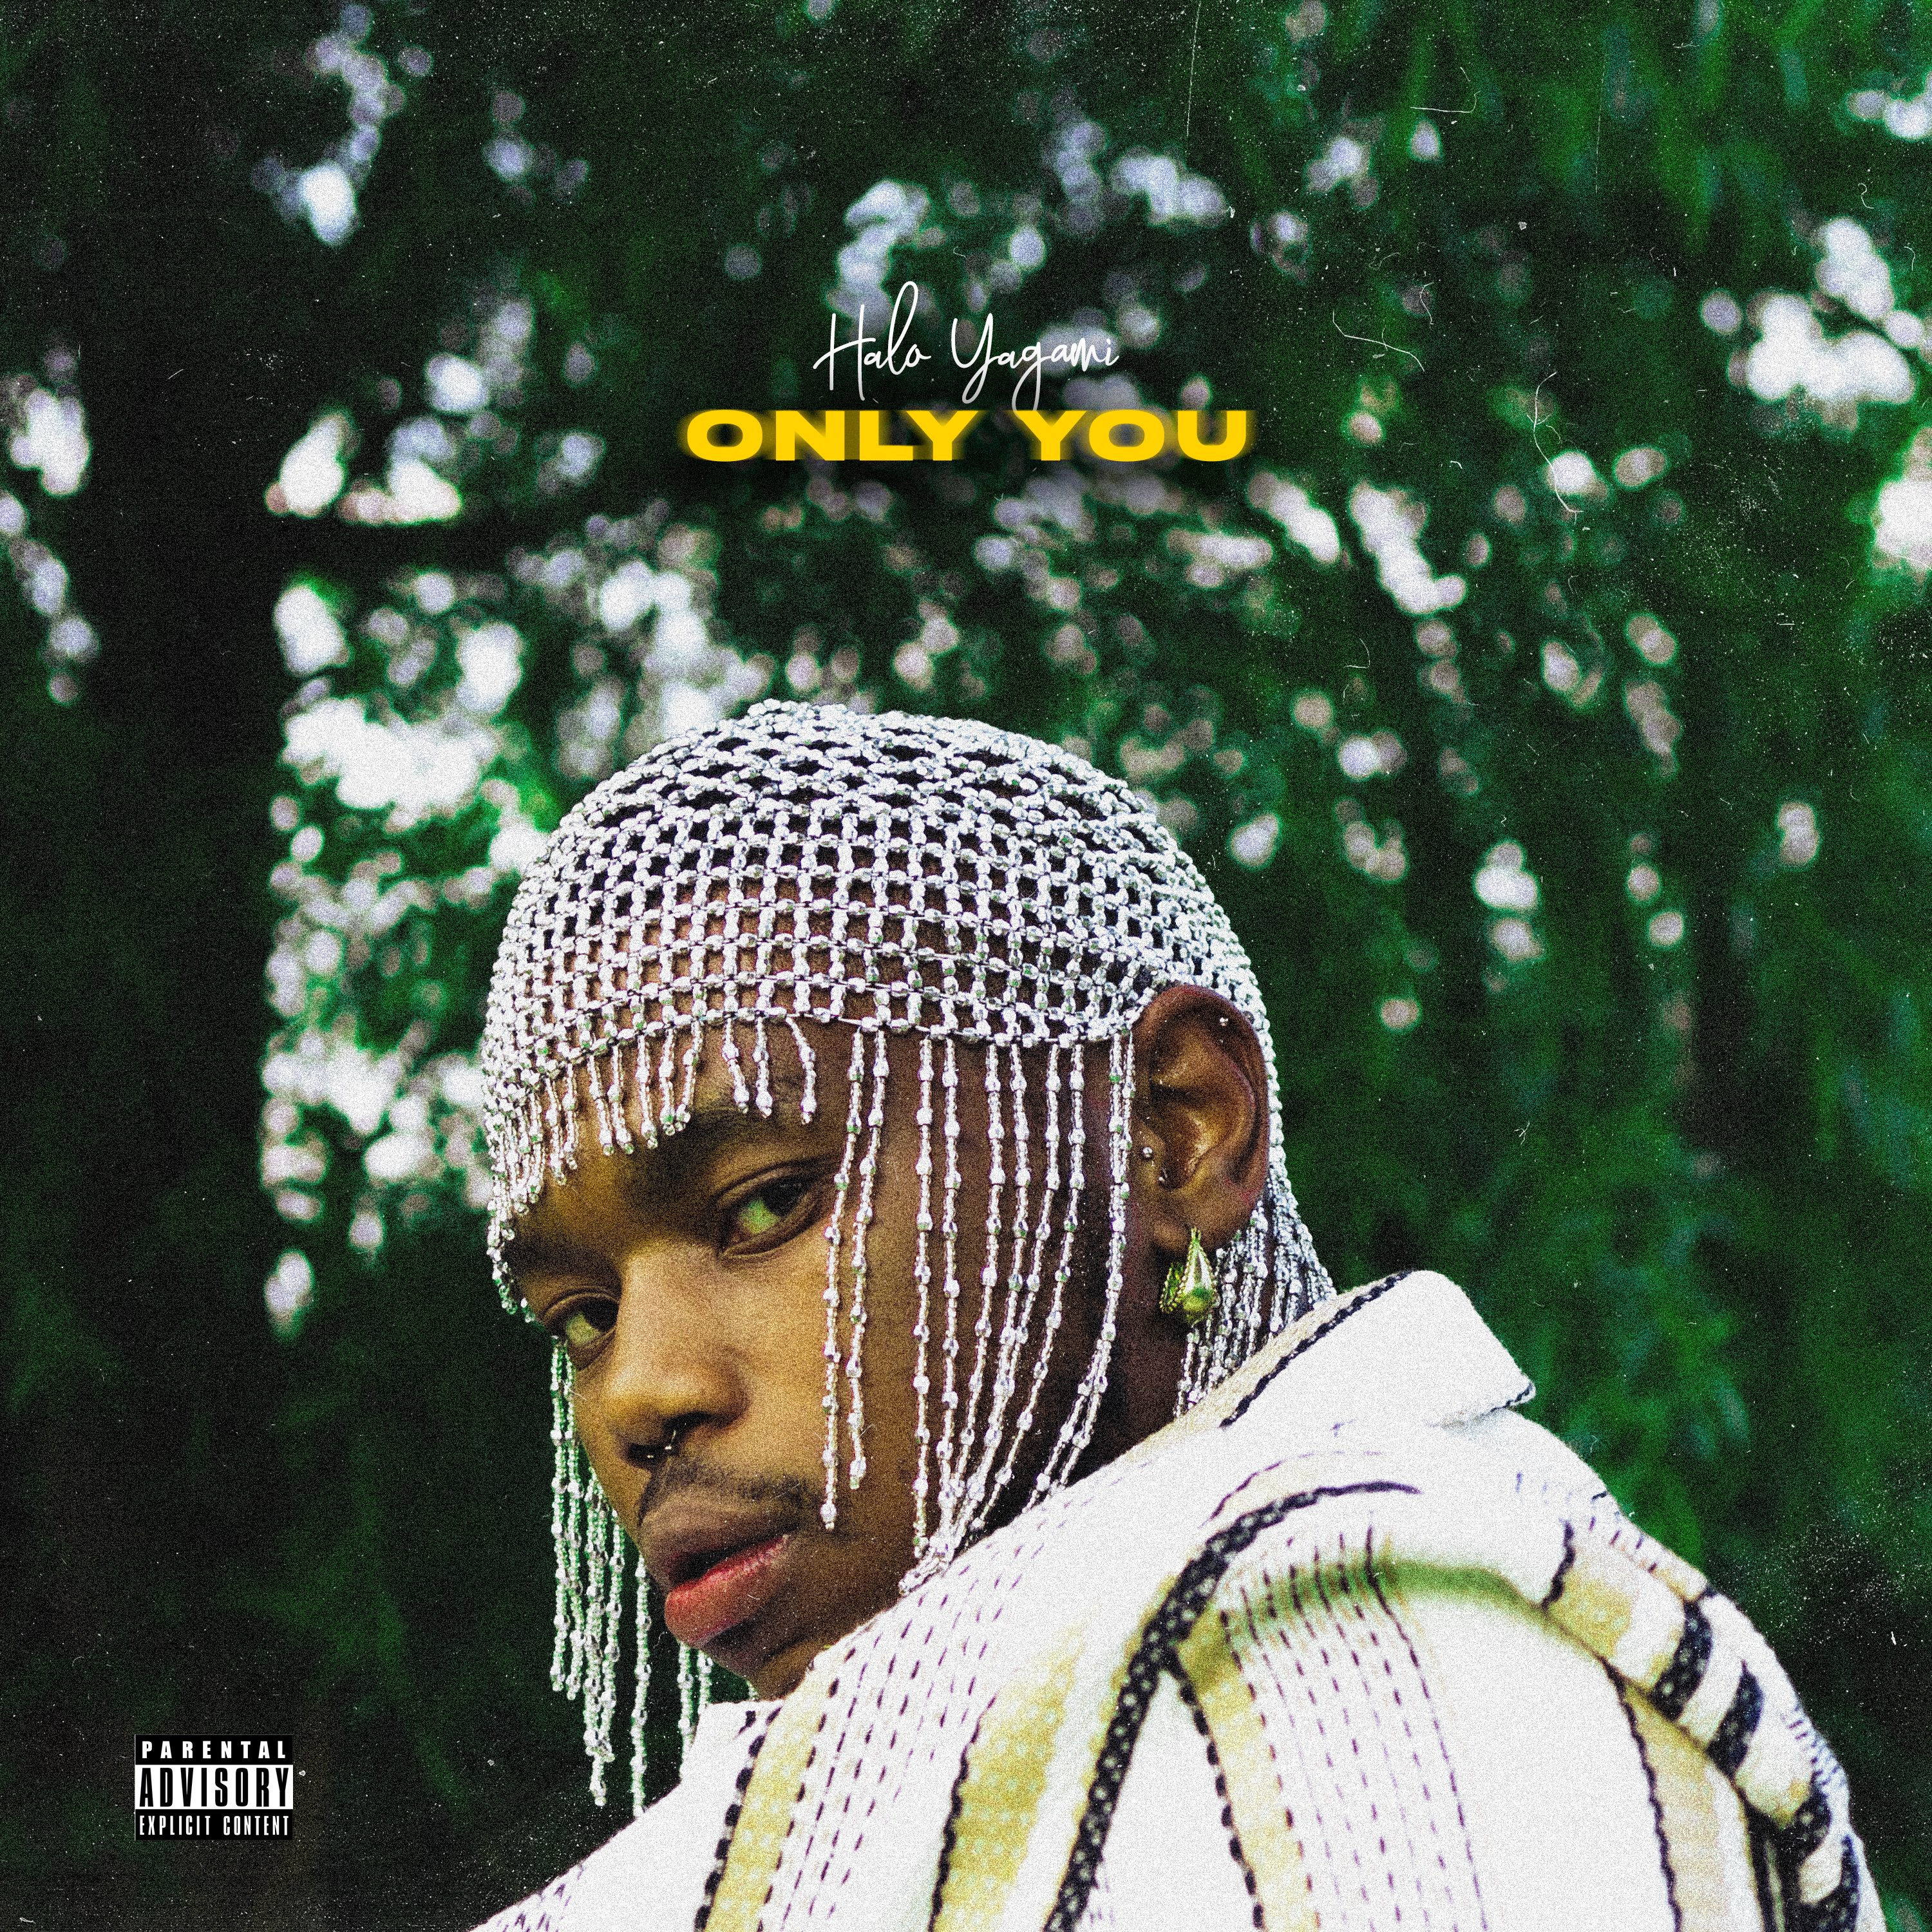 Halo Yagami - Only You